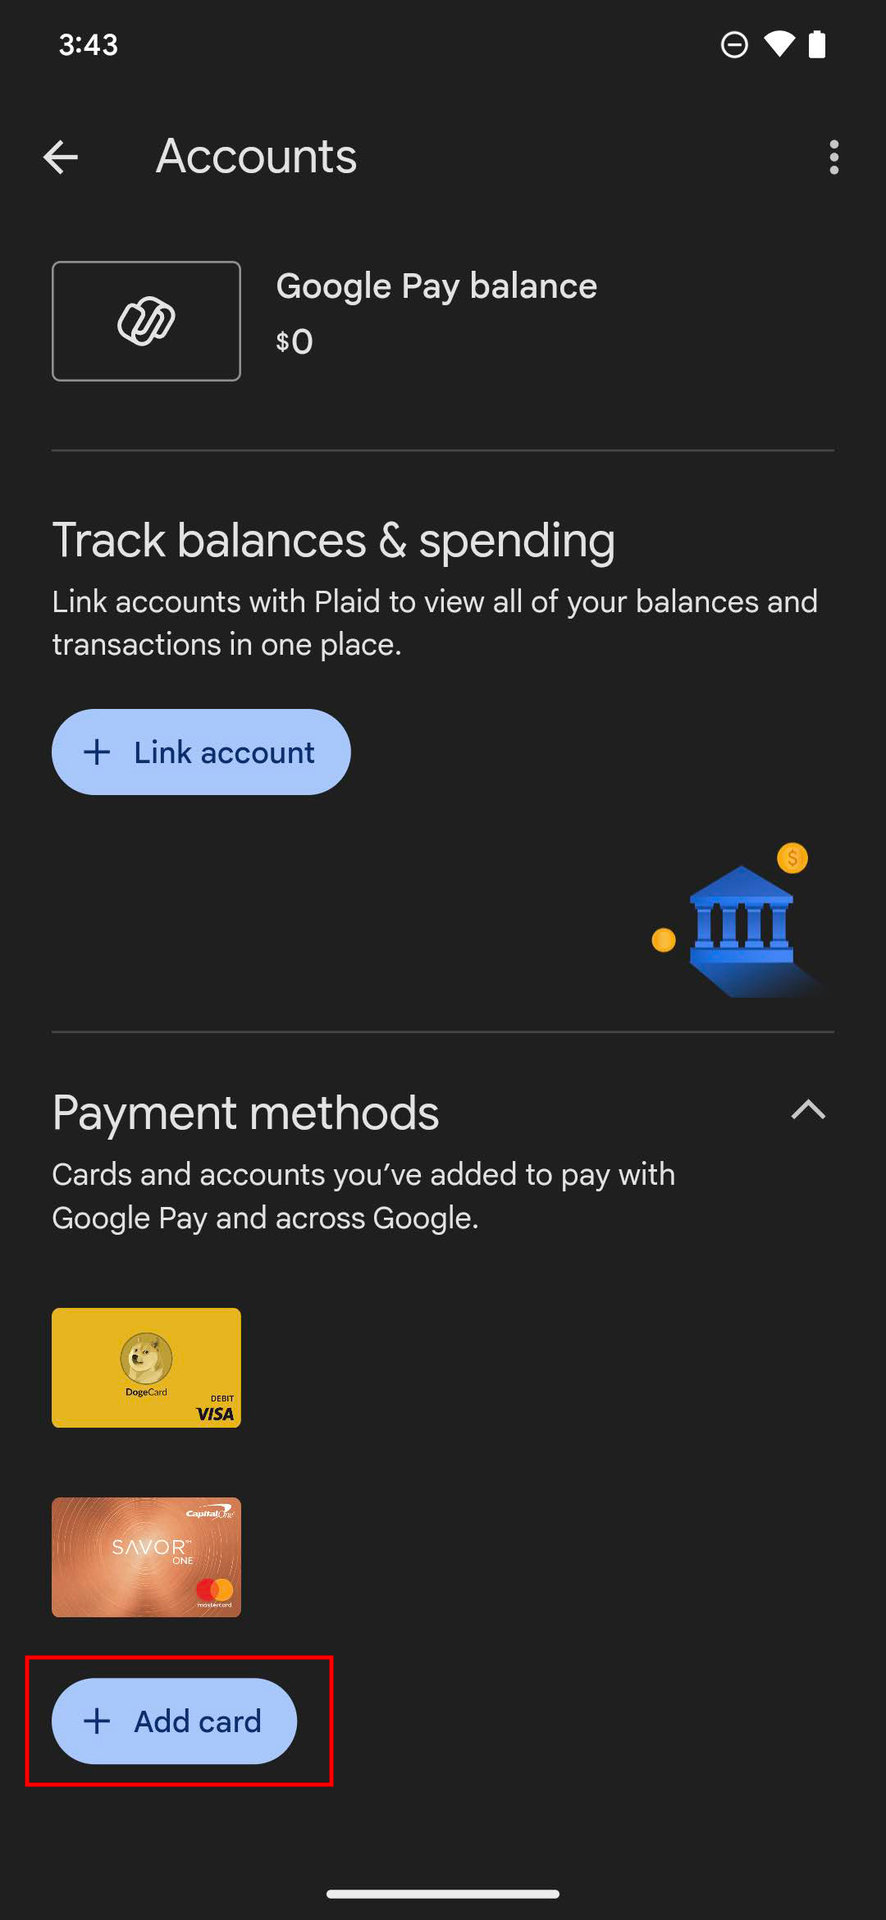 How to add a debit or credit card to Google Pay 2